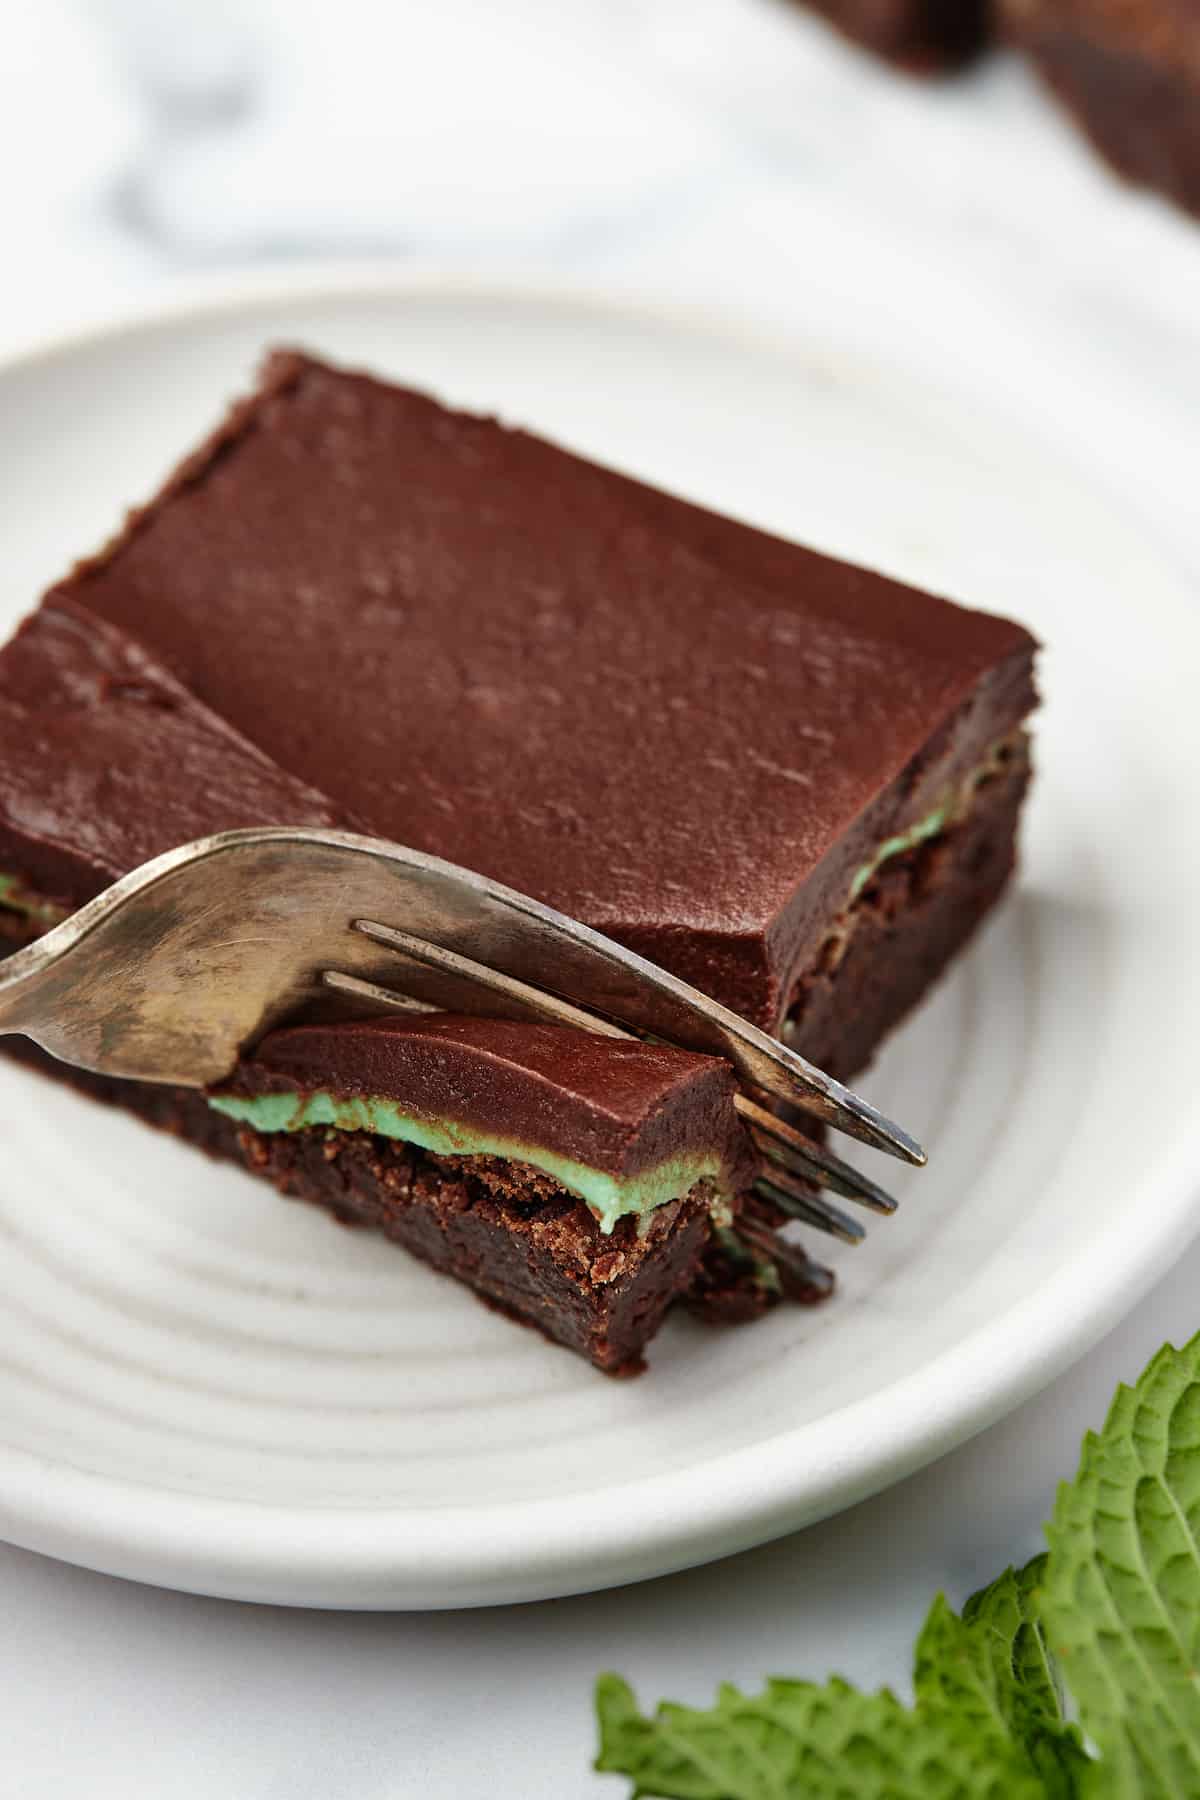 A fork digging into the corner of a frosted mint brownie